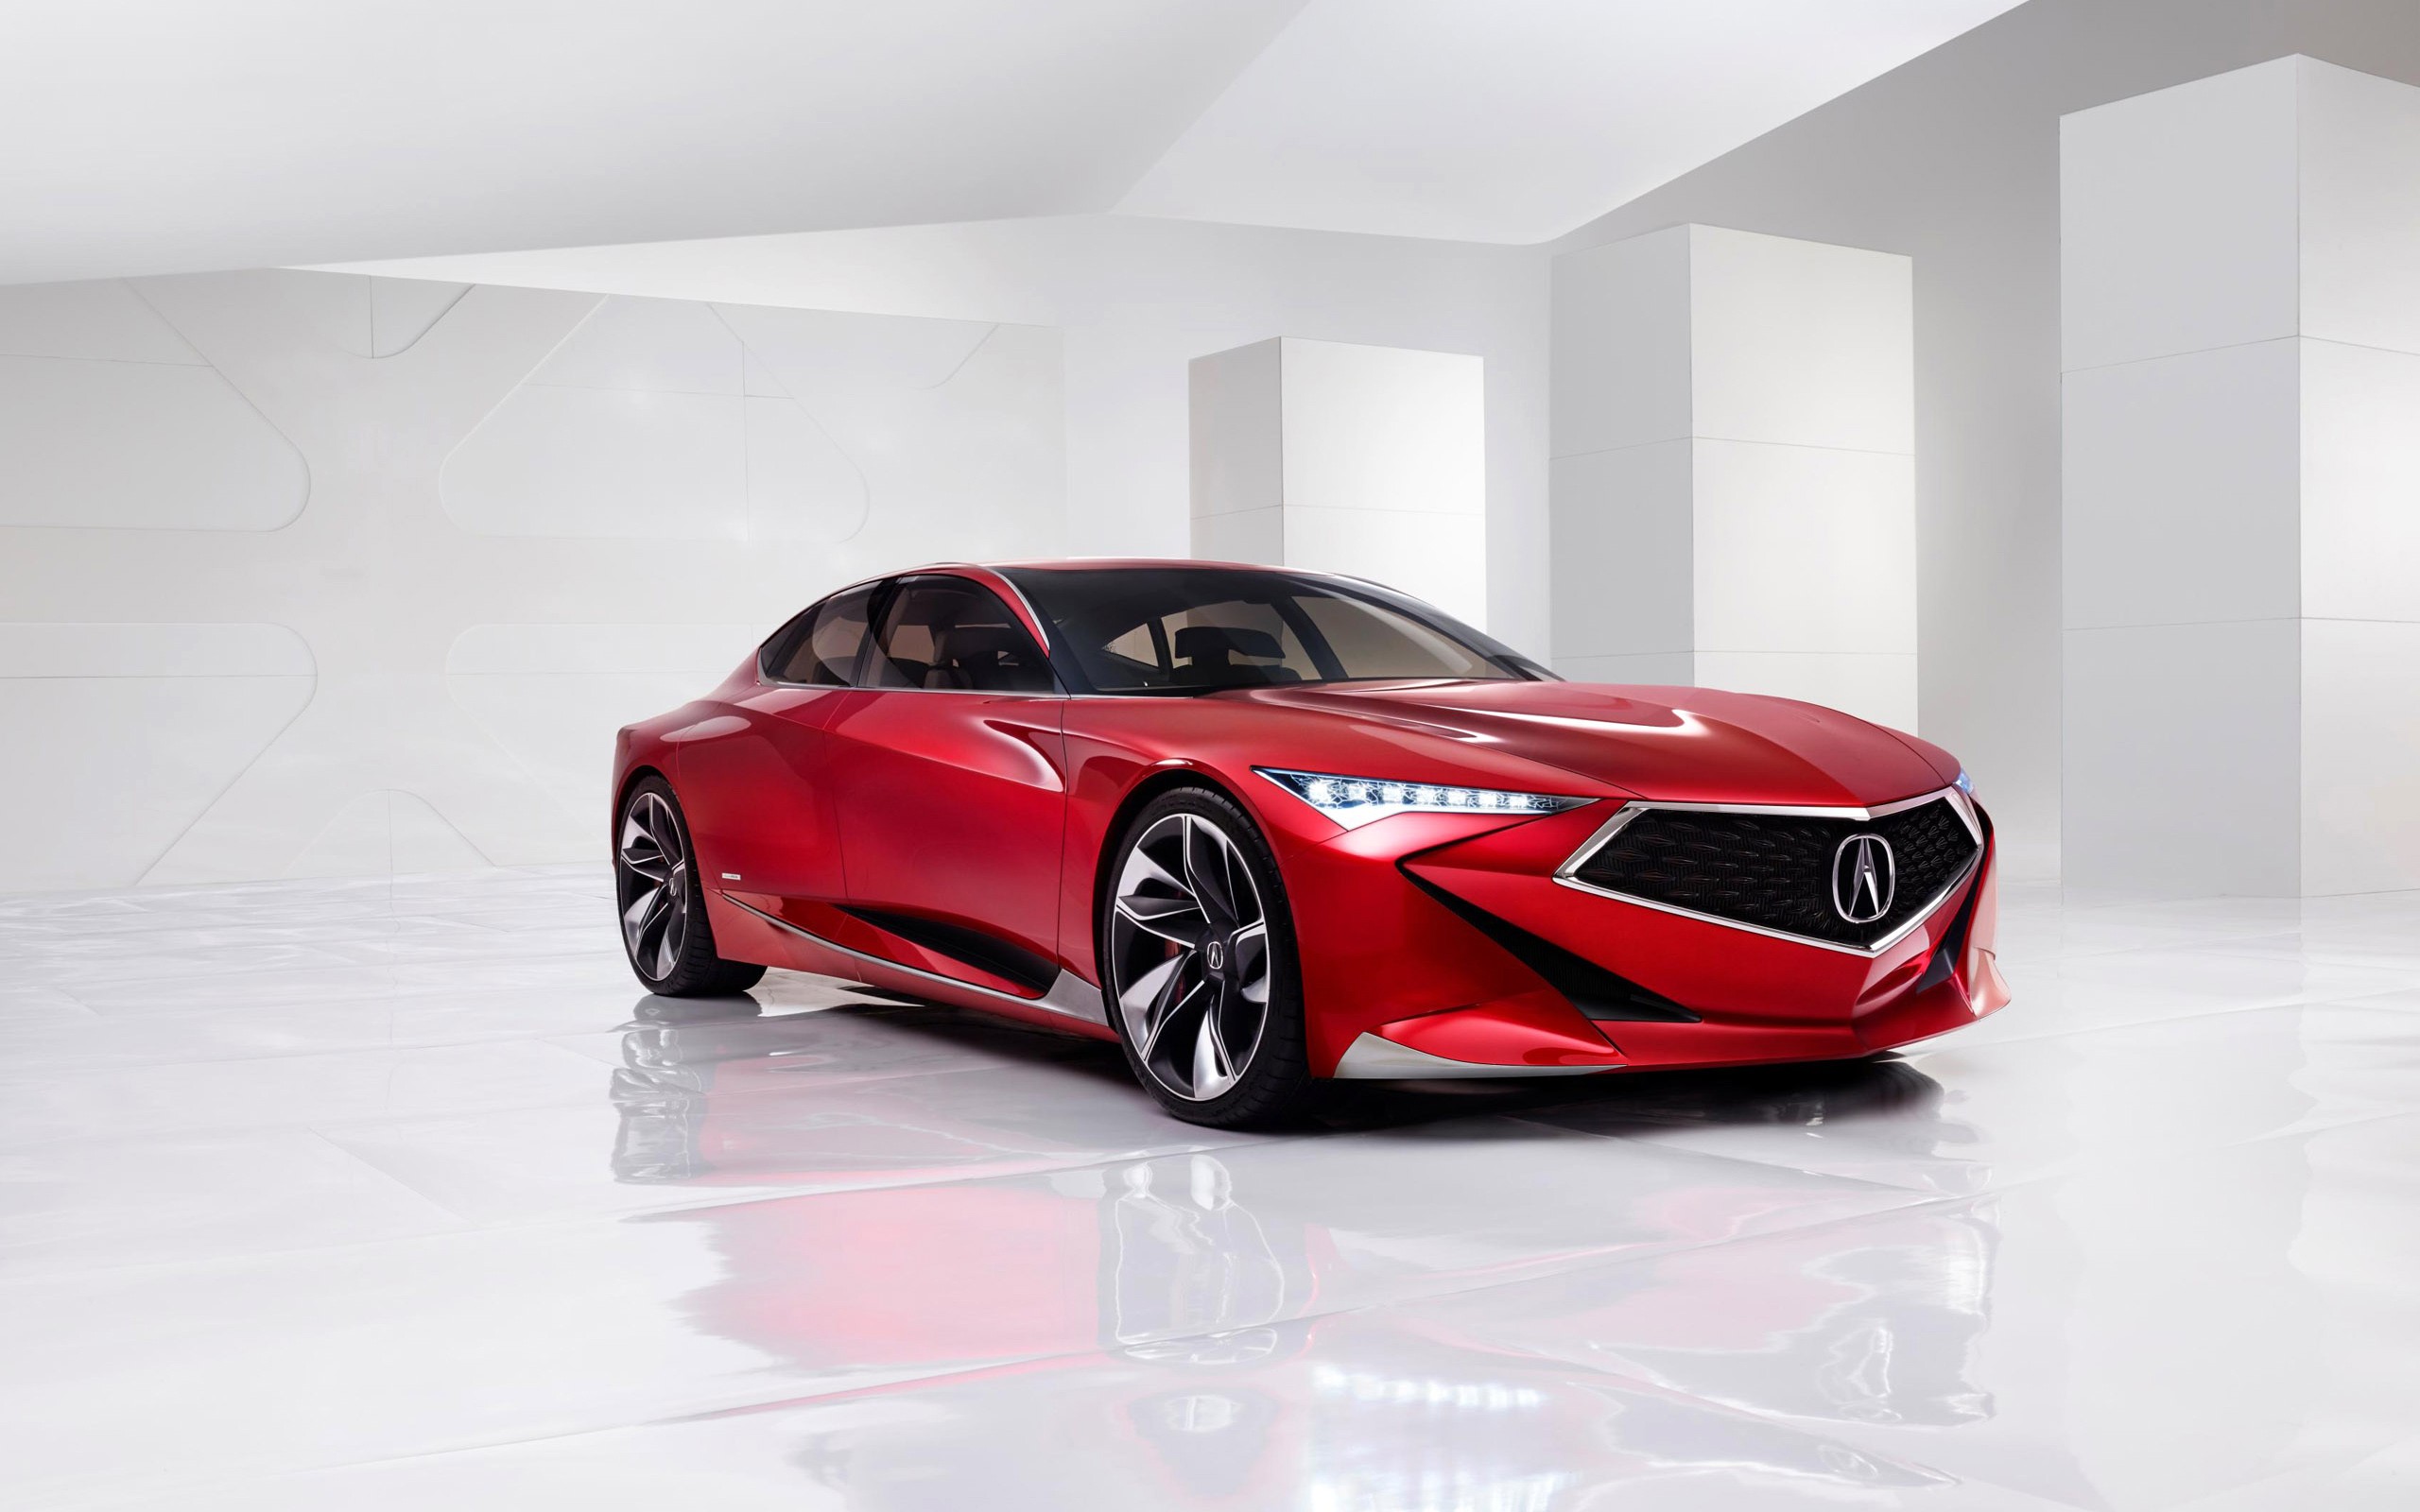 Wallpapers cars concept Acura on the desktop